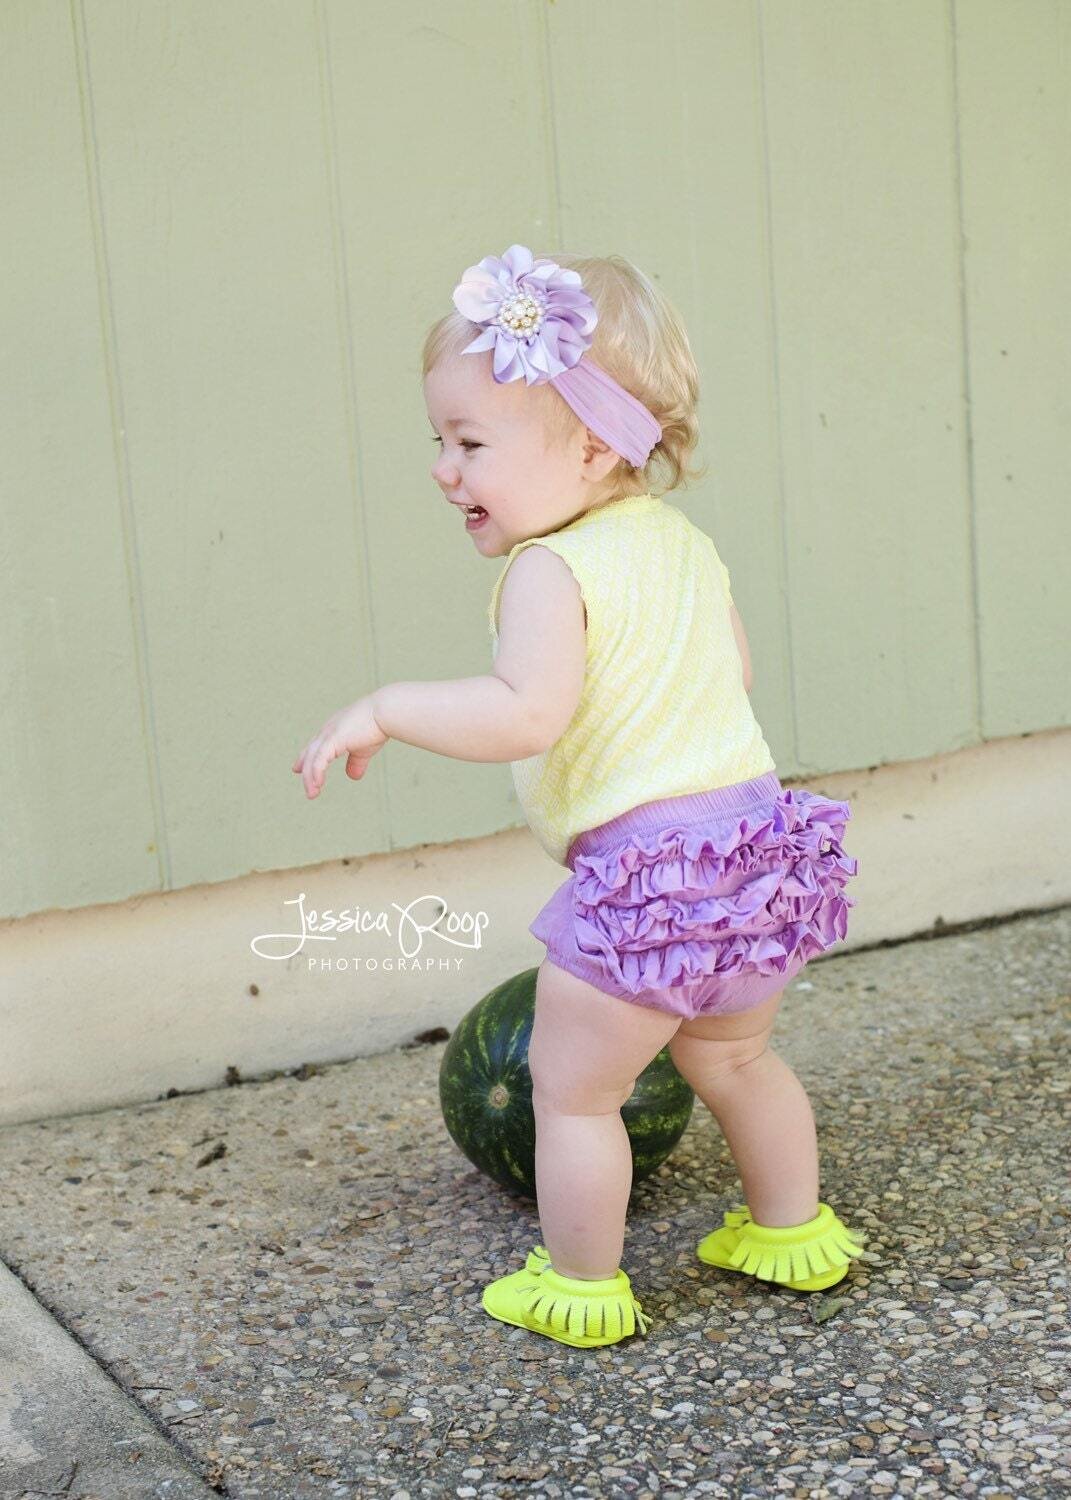 Baby Bloomers Lavender Ruffle Baby Bloomer Purple Baby Bloomers Lavender Purple Diaper Cover Baby Diaper Cover Cotton Bloomers 2221